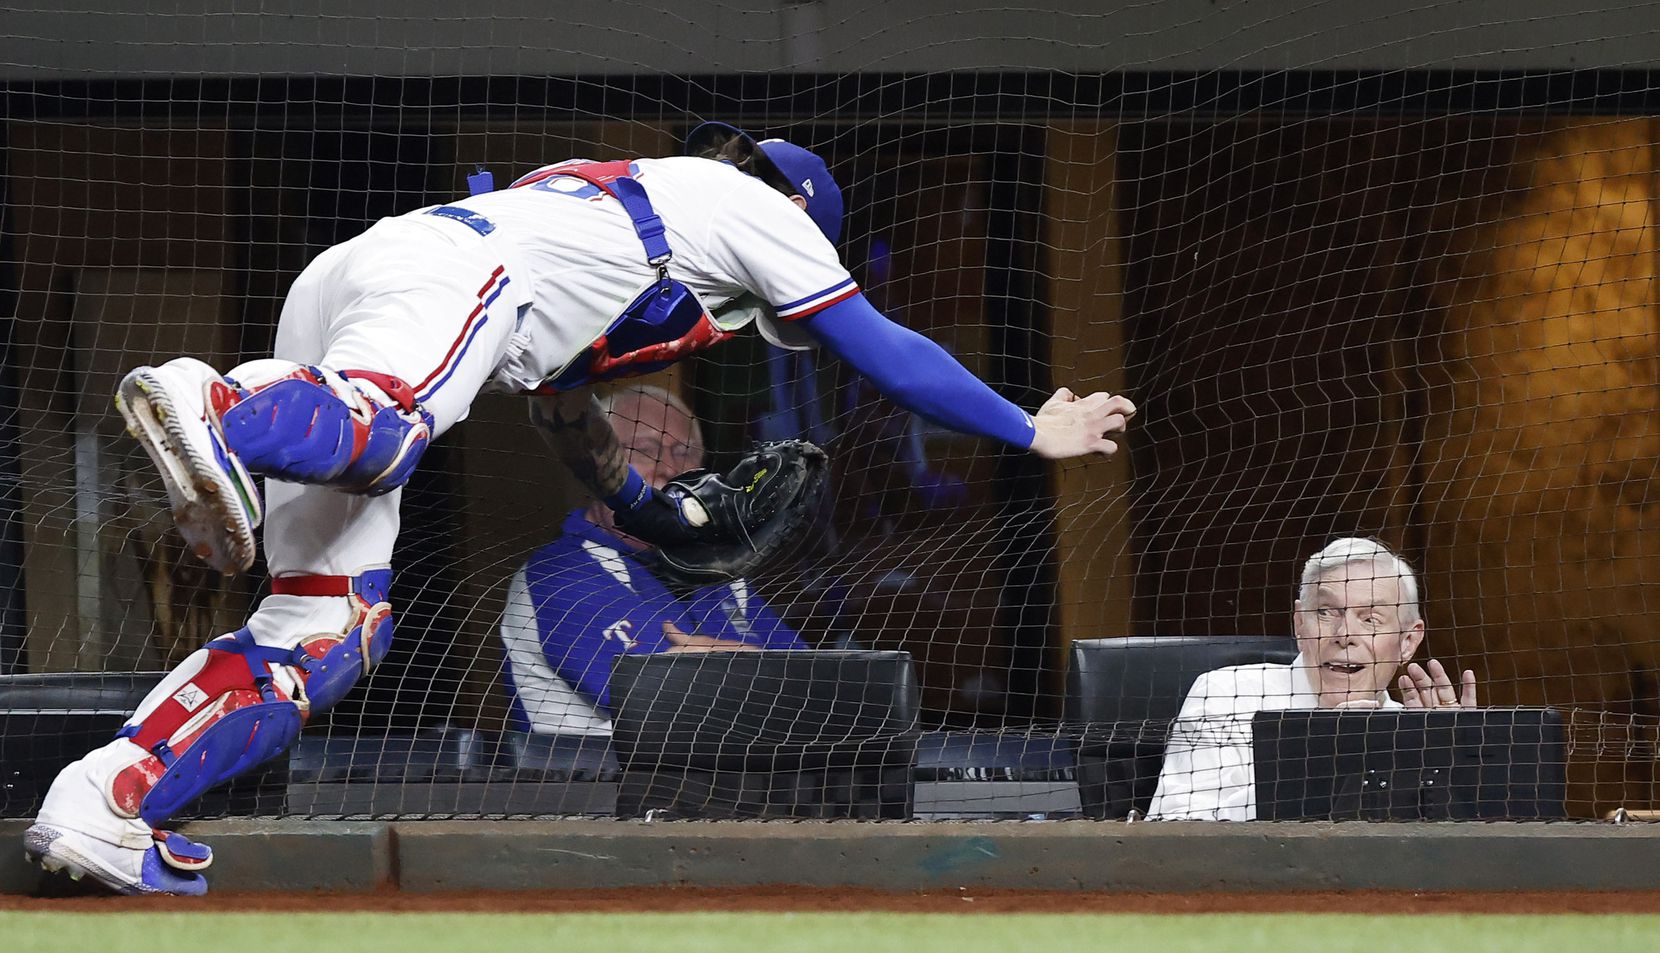 Texas Rangers co-chairman Ray C. Davis reacted as catcher Jonah Heim went into the netting after a foul ball in a game against the Oakland Athletics in August at Globe Life Field.